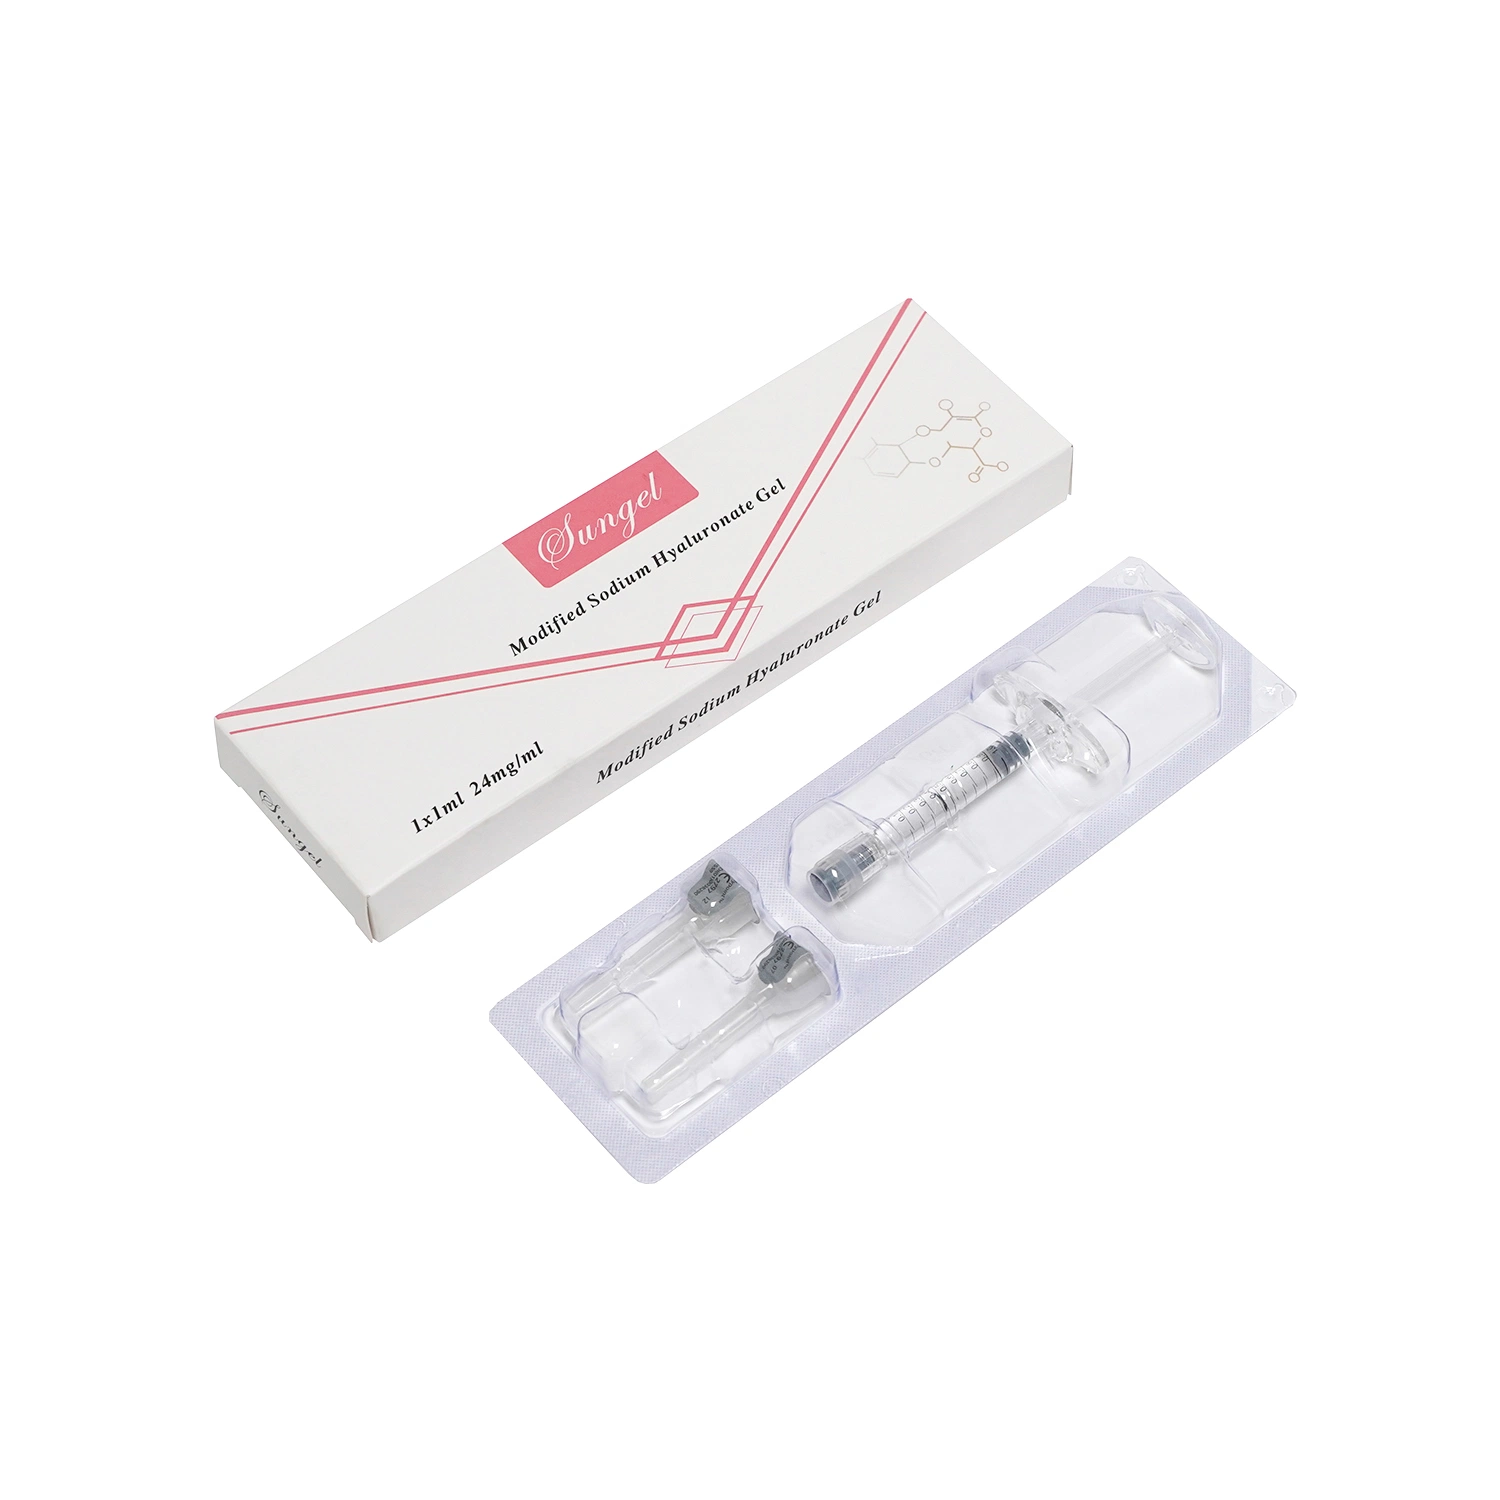 FDA Approved Sungel Ha Lidocaine Dermal Filler Cosmetic Injection with 24mg Hyaluronic Acid